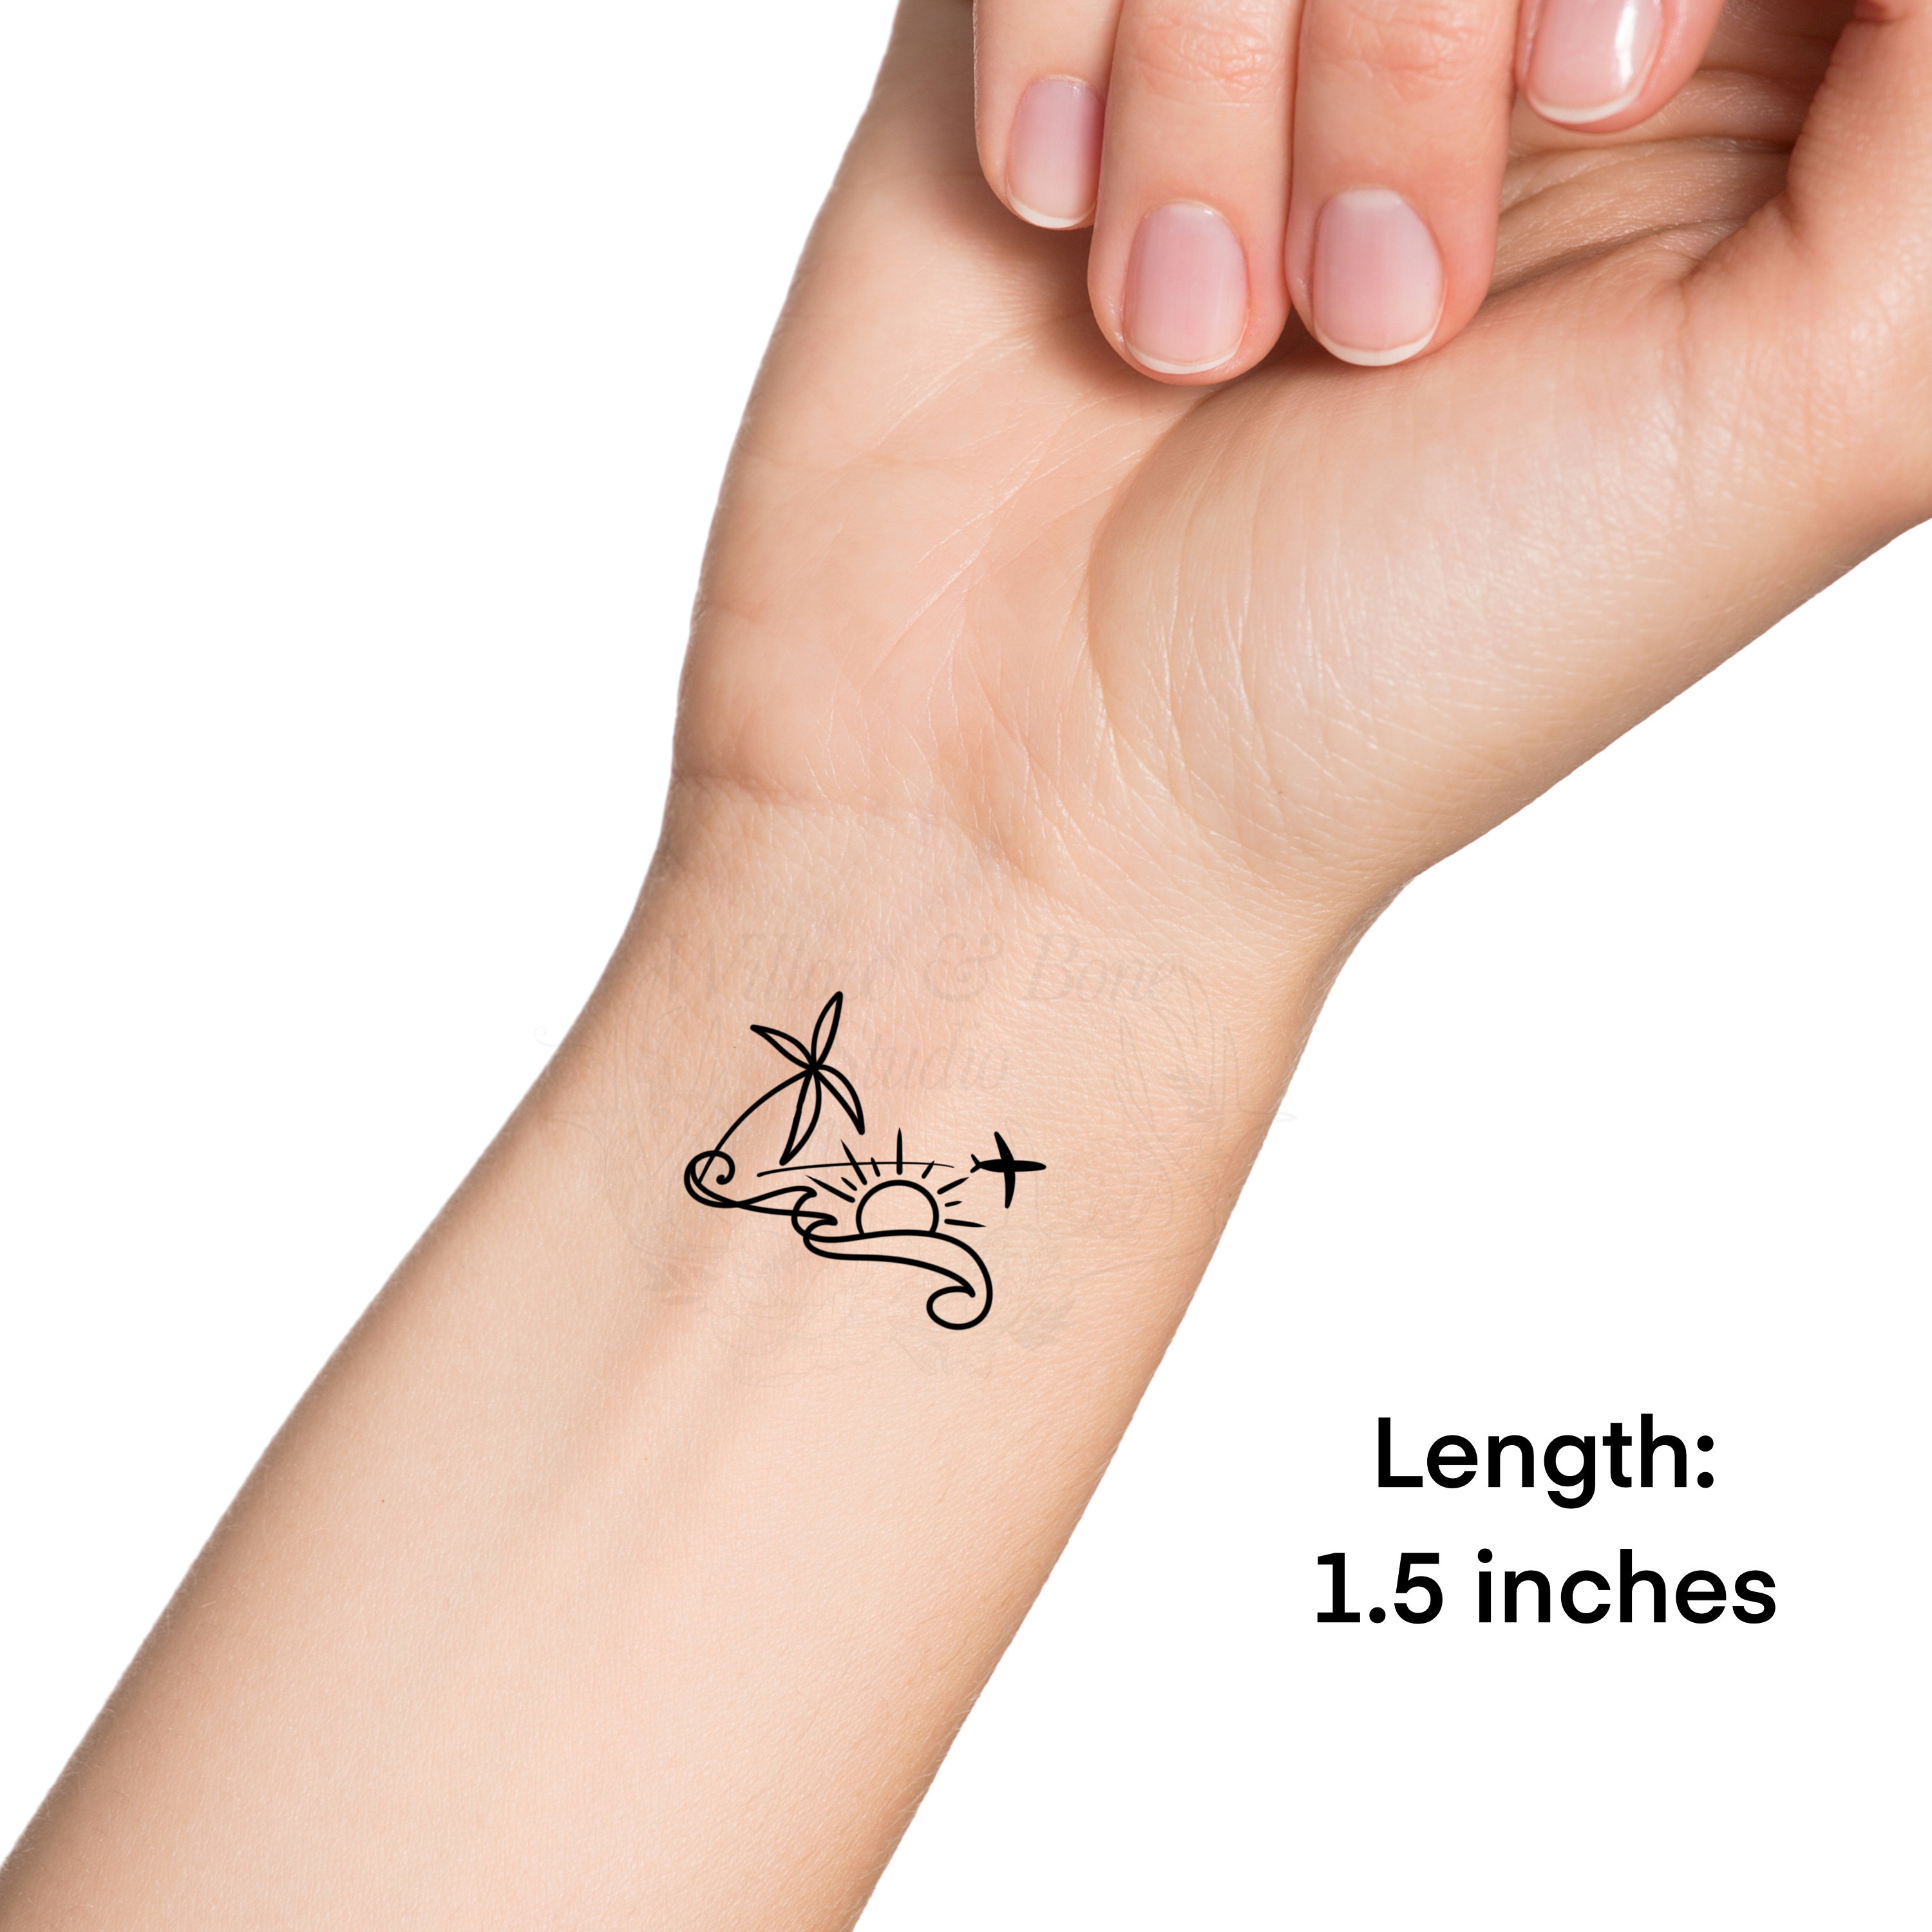 Tinker bell tattoo located on the inner arm,